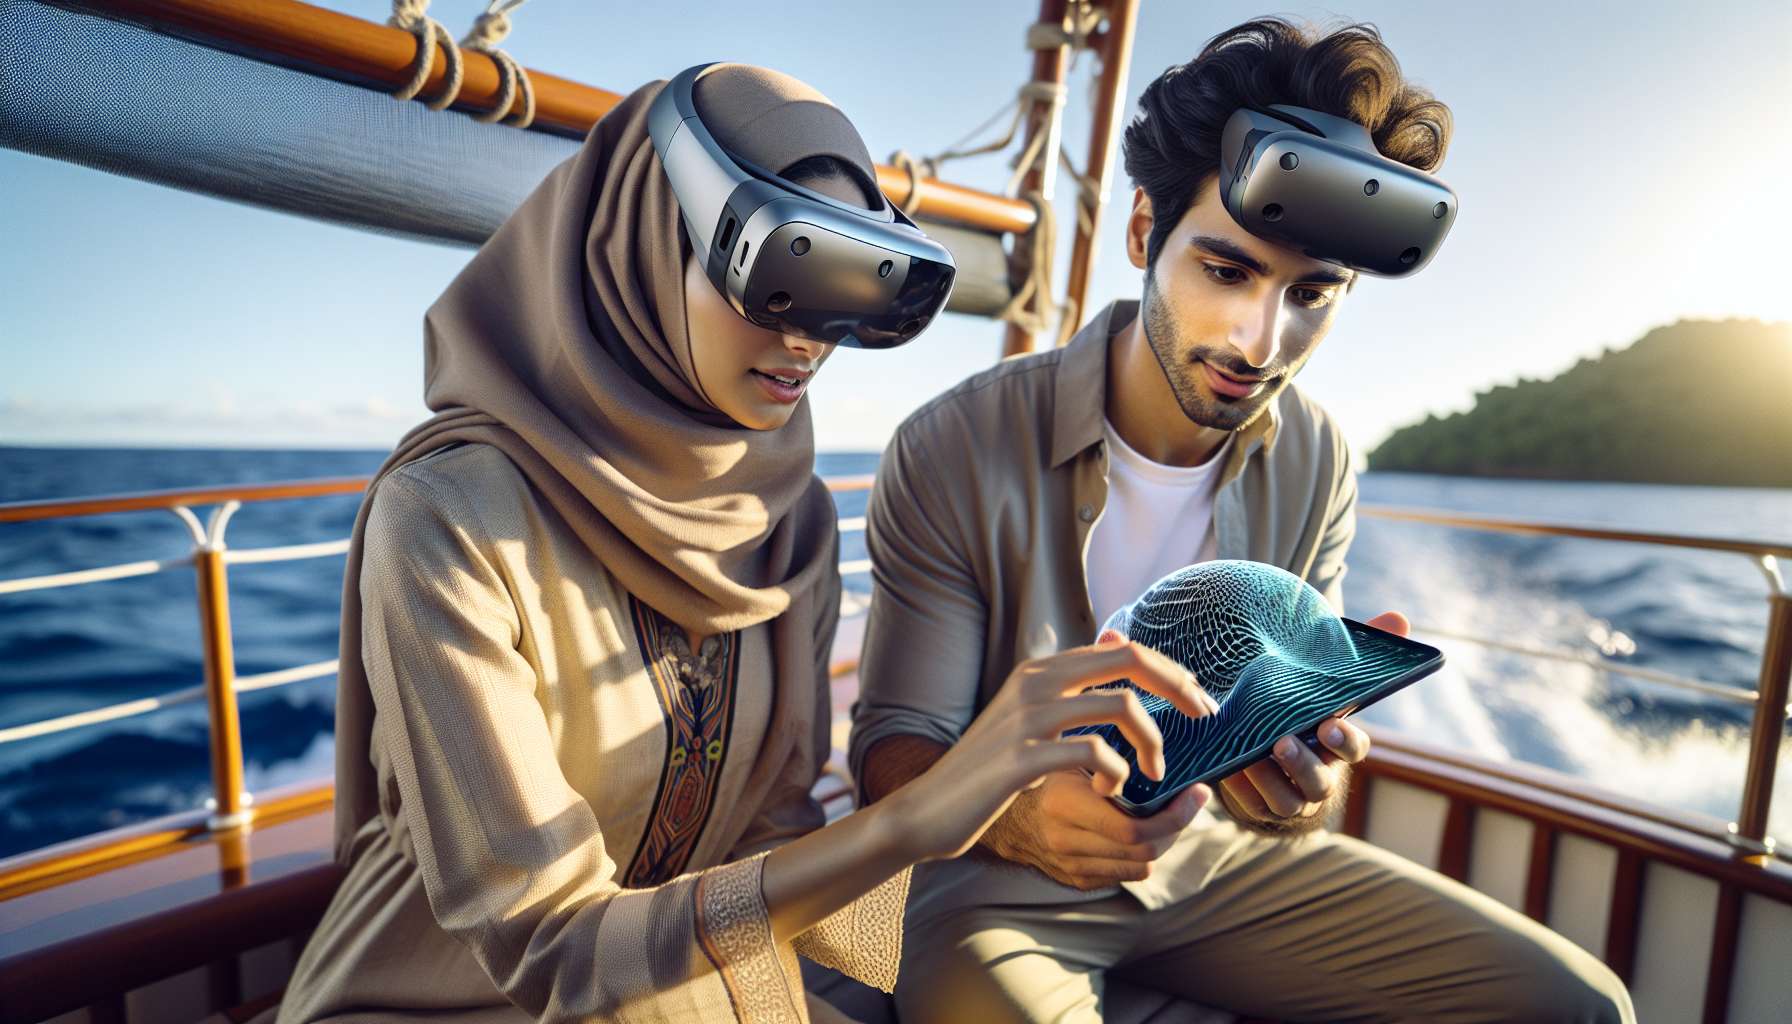 Cruising with AR: A New Wave in Marine Travel